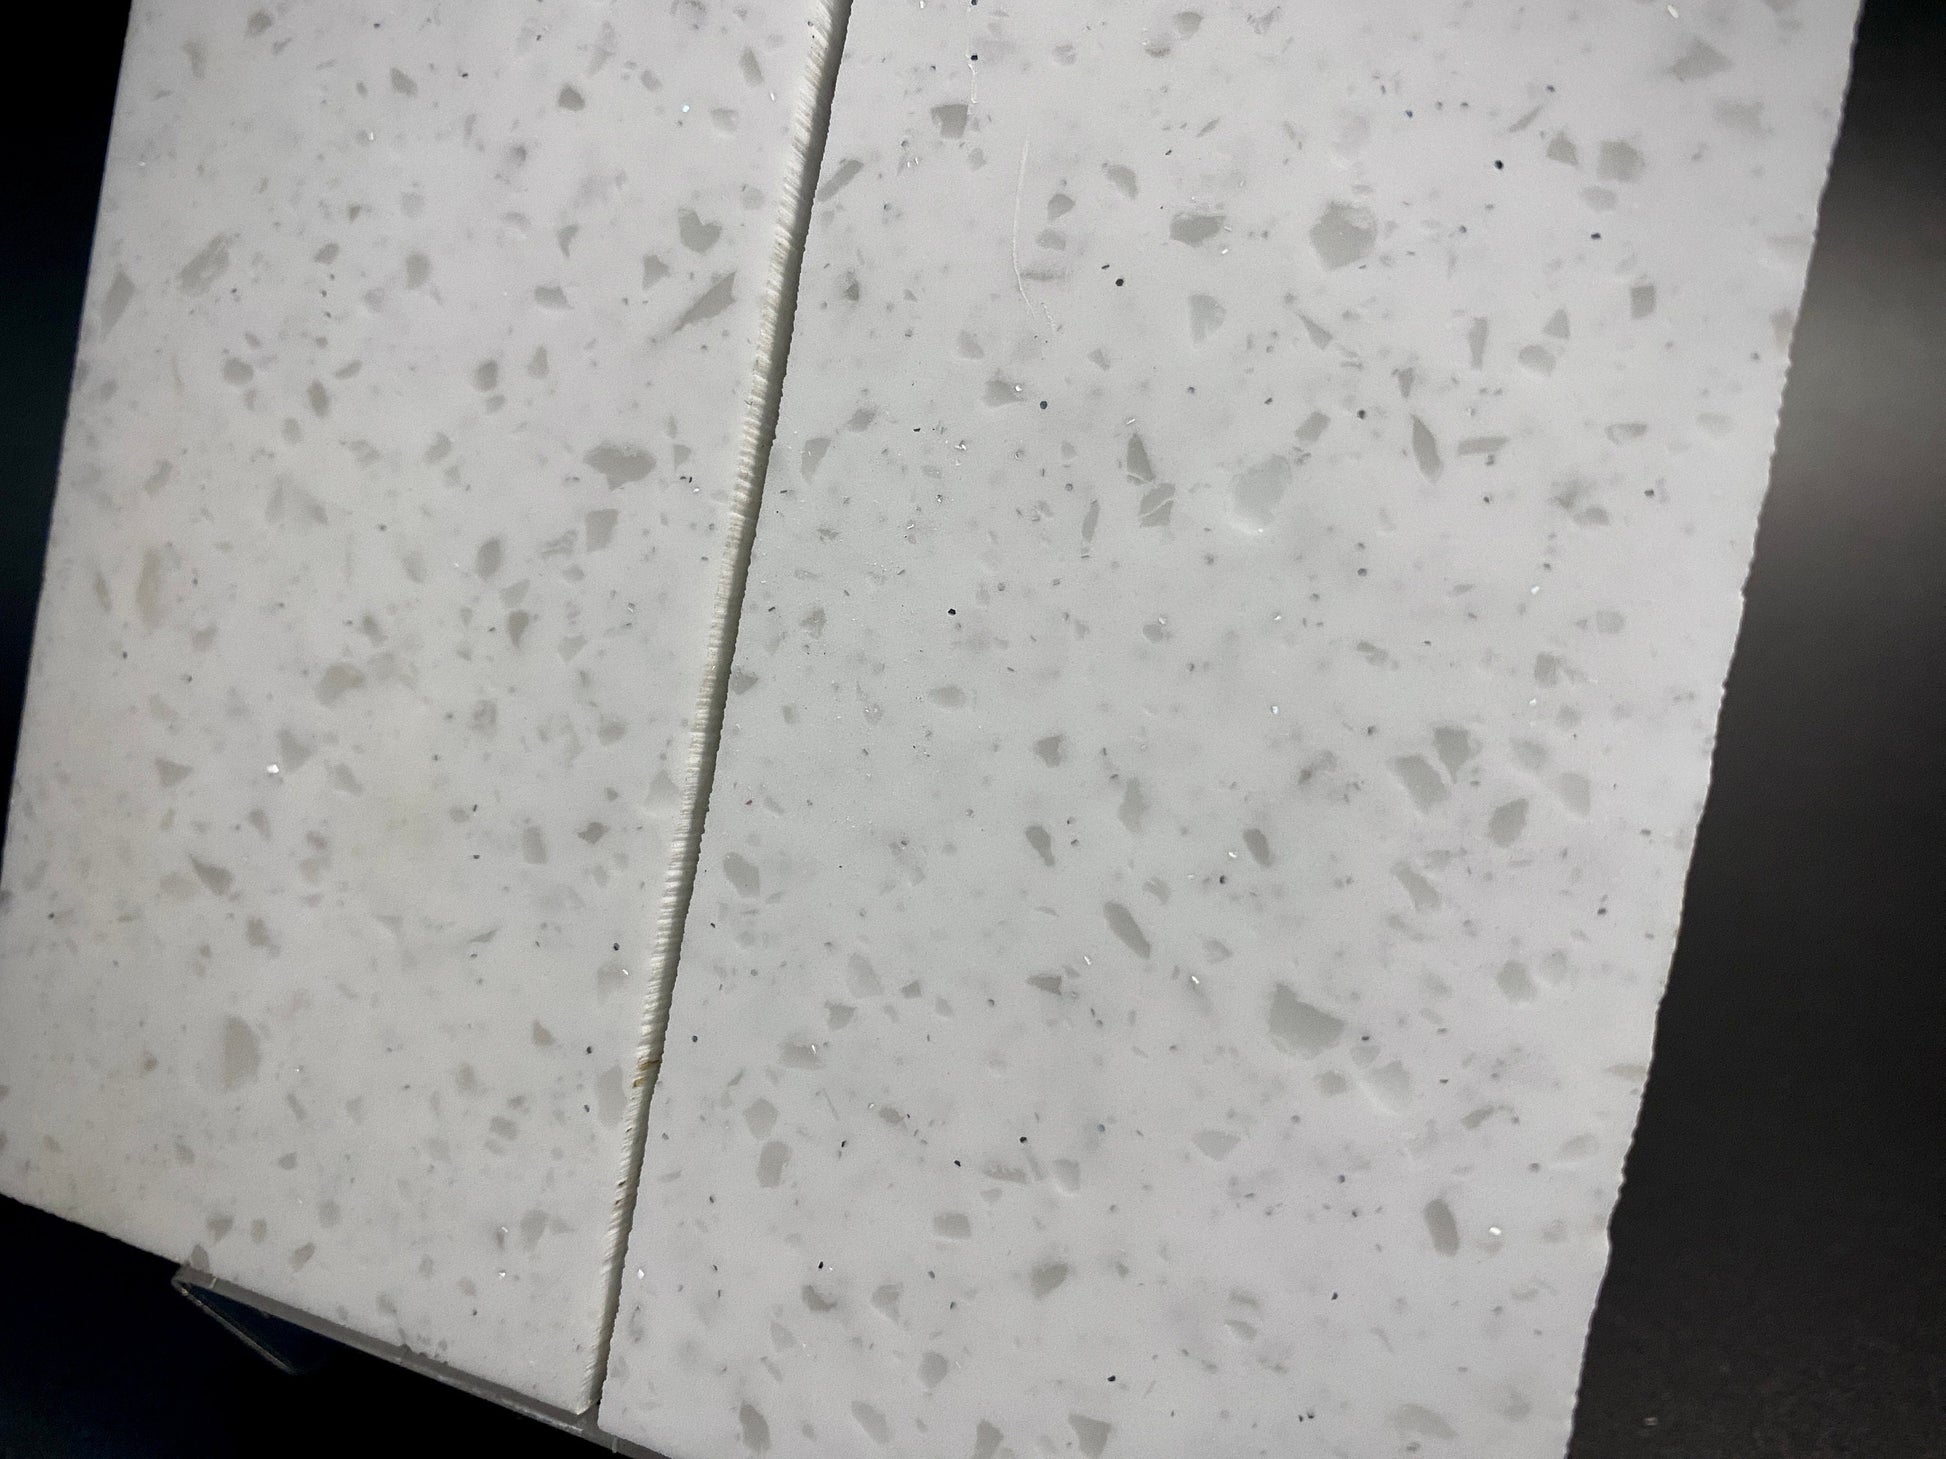 ARTIFICIAL STONE Acrylic, "White Quartz", Paired Blanks for crafting and tools making. #ST.4